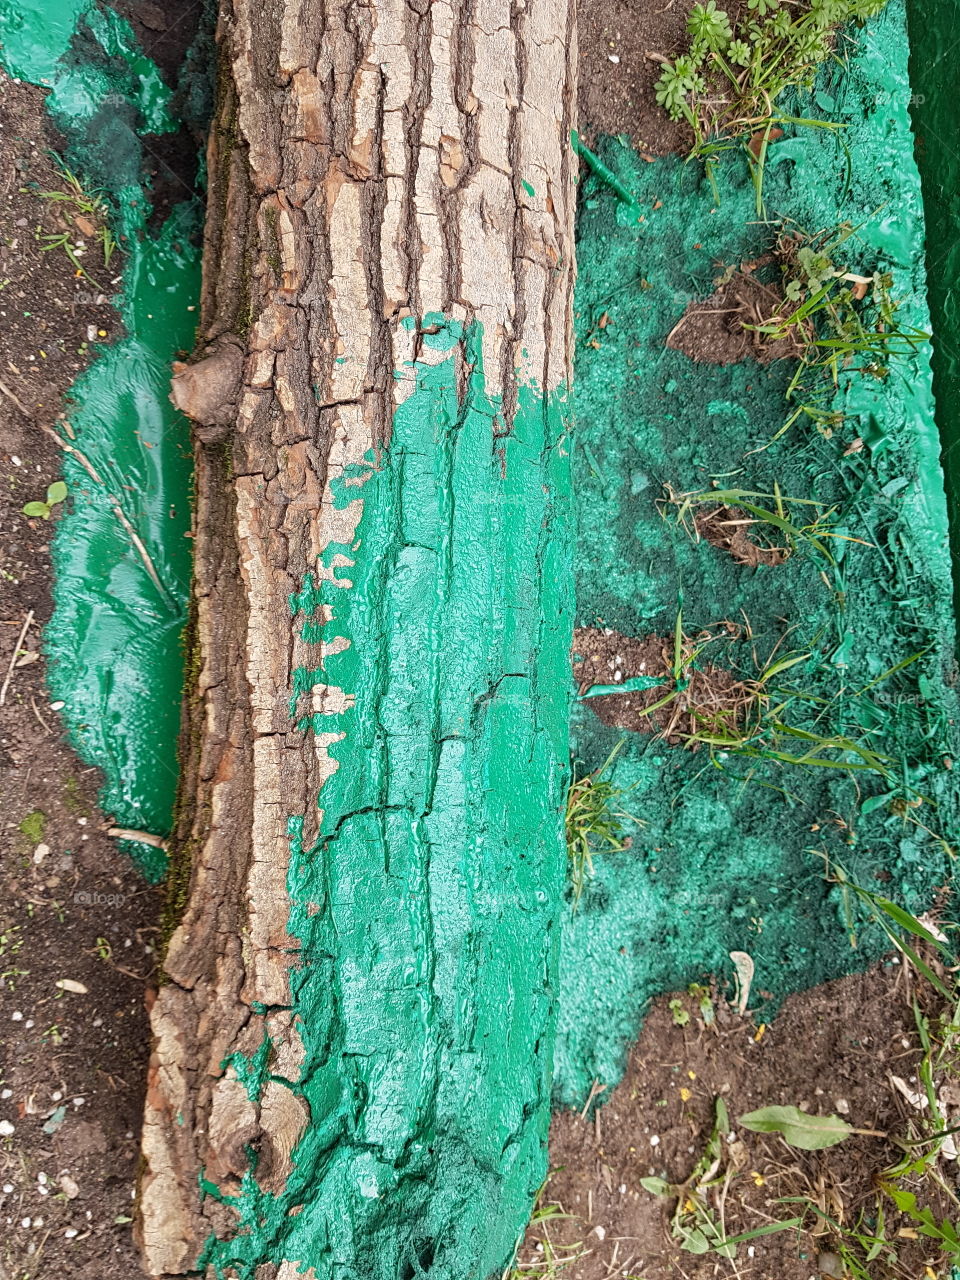 The trunk of a tree lies in a puddle of green paint